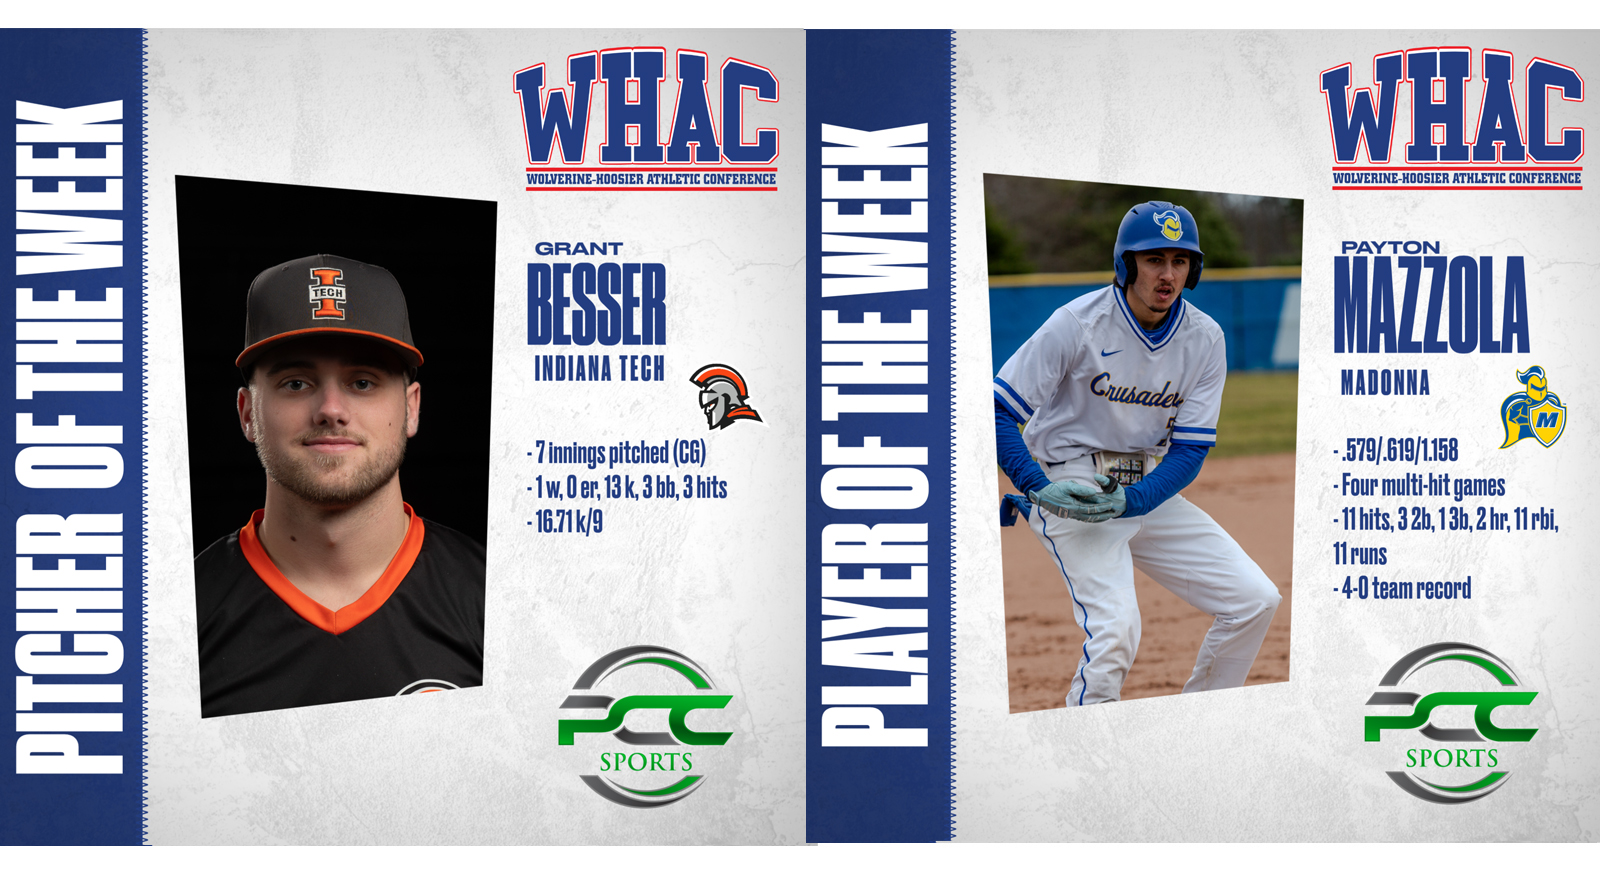 Besser and Mazzola win Weekly Honors